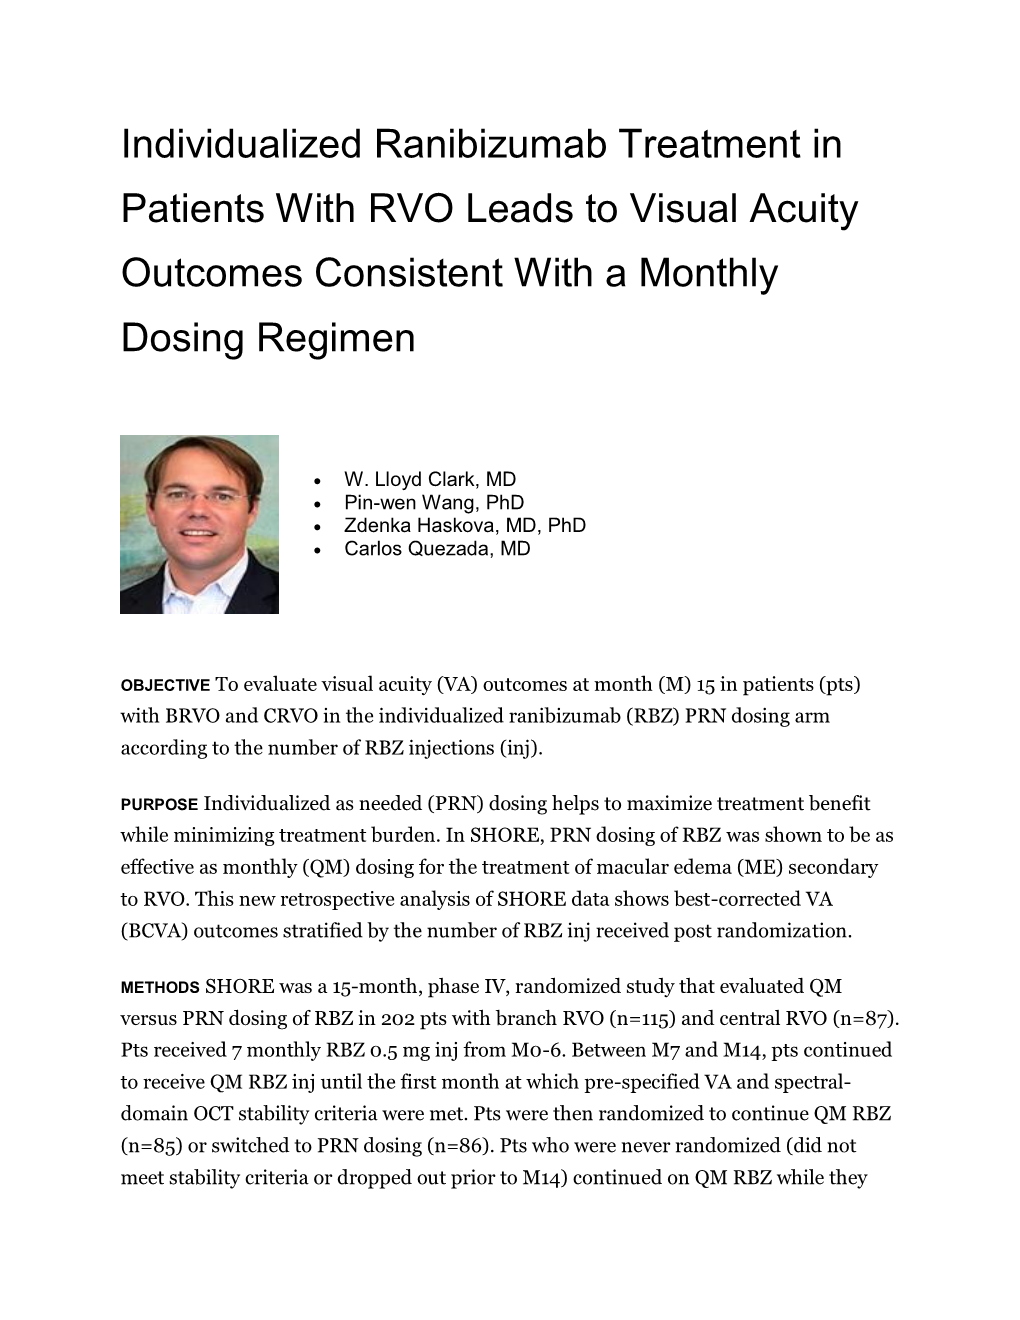 Individualized Ranibizumab Treatment in Patients with RVO Leads to Visual Acuity Outcomes Consistent with a Monthly Dosing Regimen